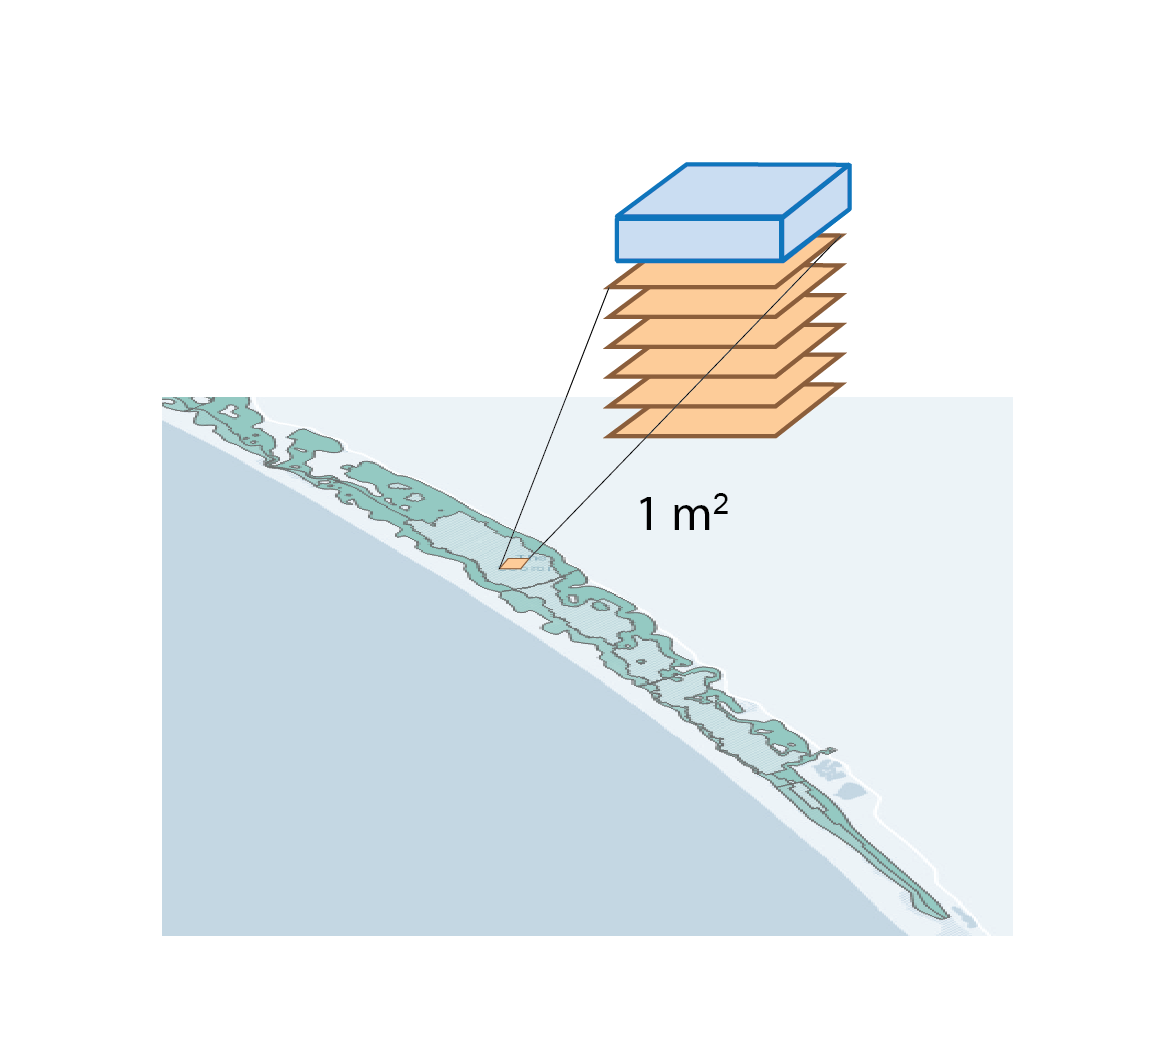 Diagram representing the approach to area in this study. For the purposes of calculating mass, a representative 1 m2 from the South Lagoon was used